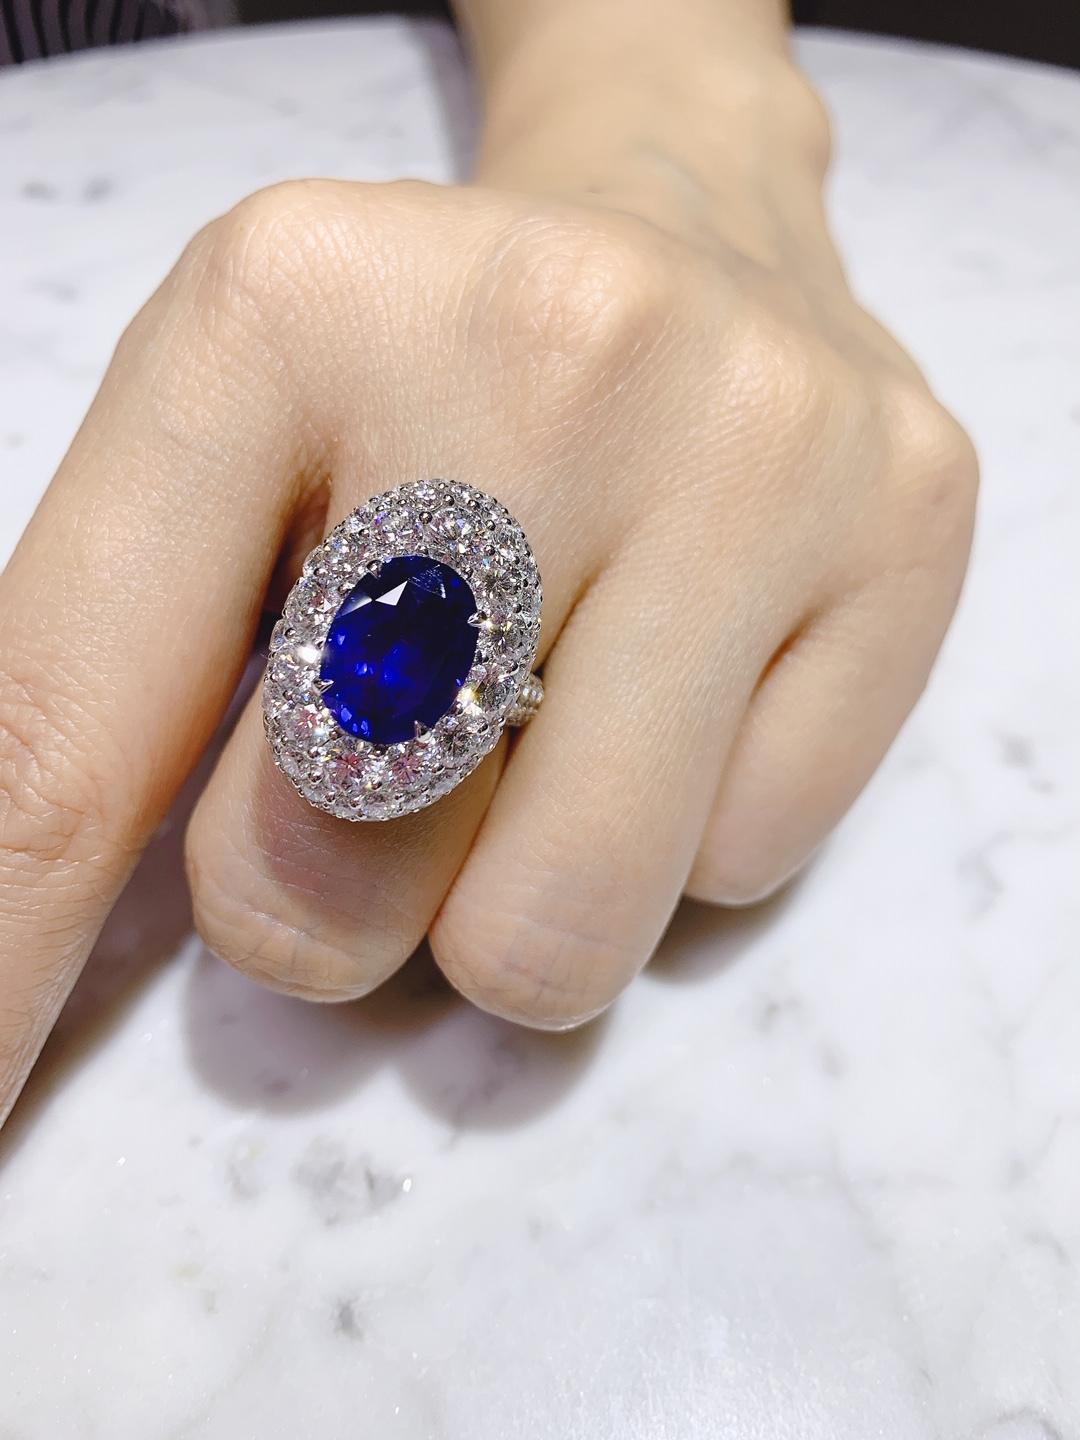 GRS Certified 6.24 Carat Ceylon Blue Sapphire Ring 'Heated' For Sale 1